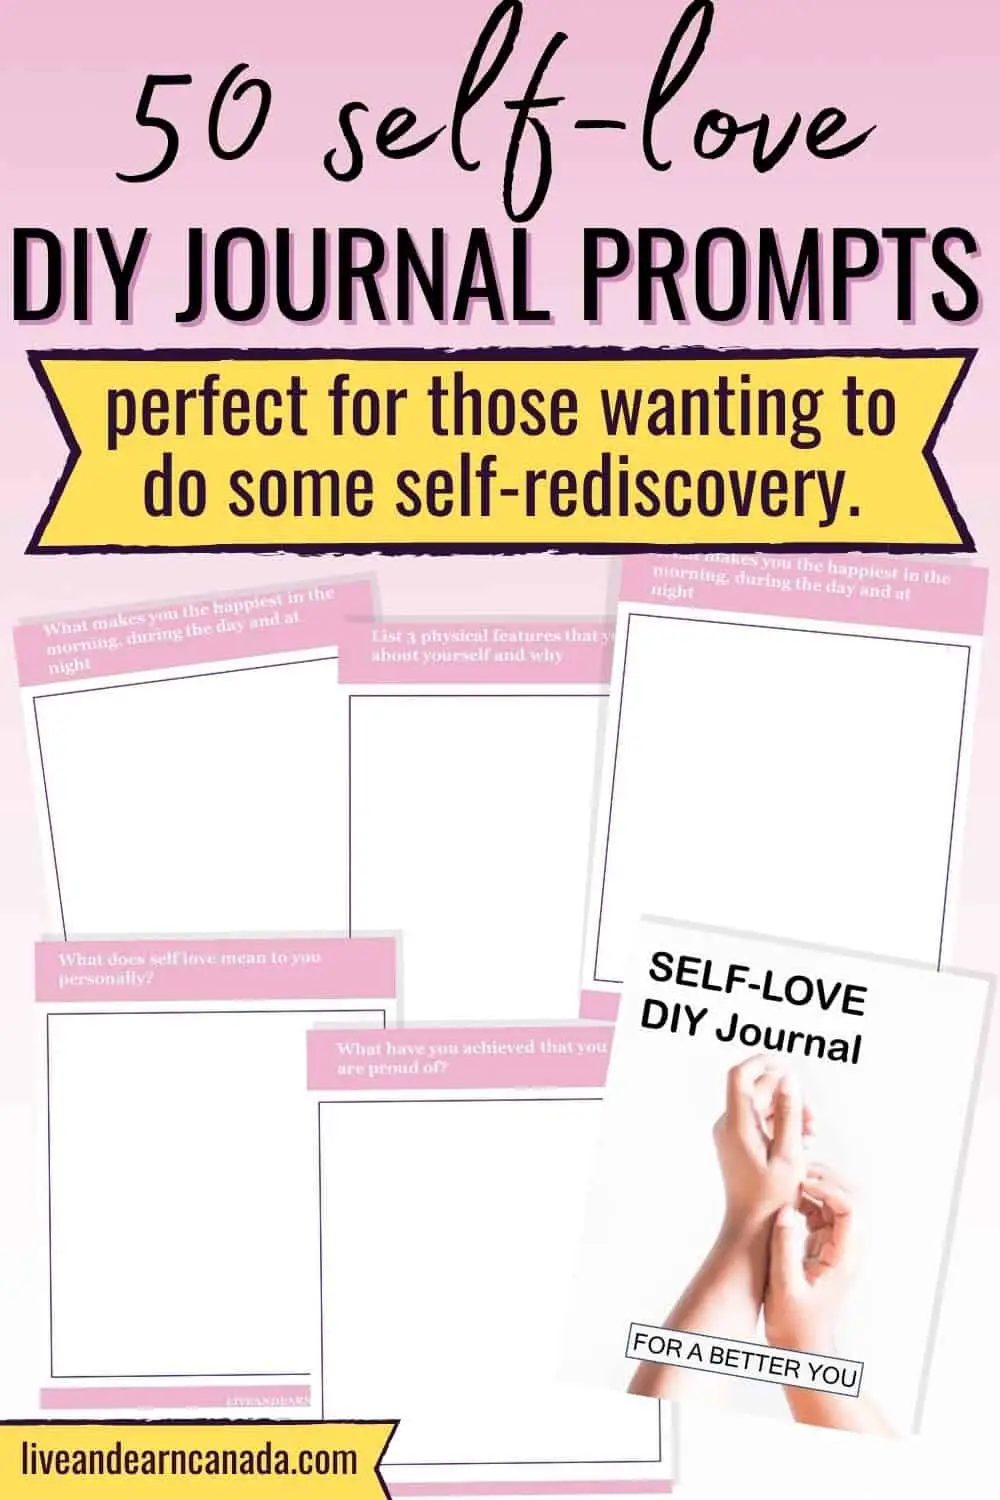 50 Self-Love Journal Prompts for self love. Journaling therapy can improve mental health reduce anxiety. Men and women can try these prompts to improve self esteem and confidence. Getting to know yourself can help reduce anxiety and feelings of low self worth. Self care journal prompts for beginners. #journalprompts #selflove #selfcare #selfworth #anxiety #selfesteem #selfdiscovery